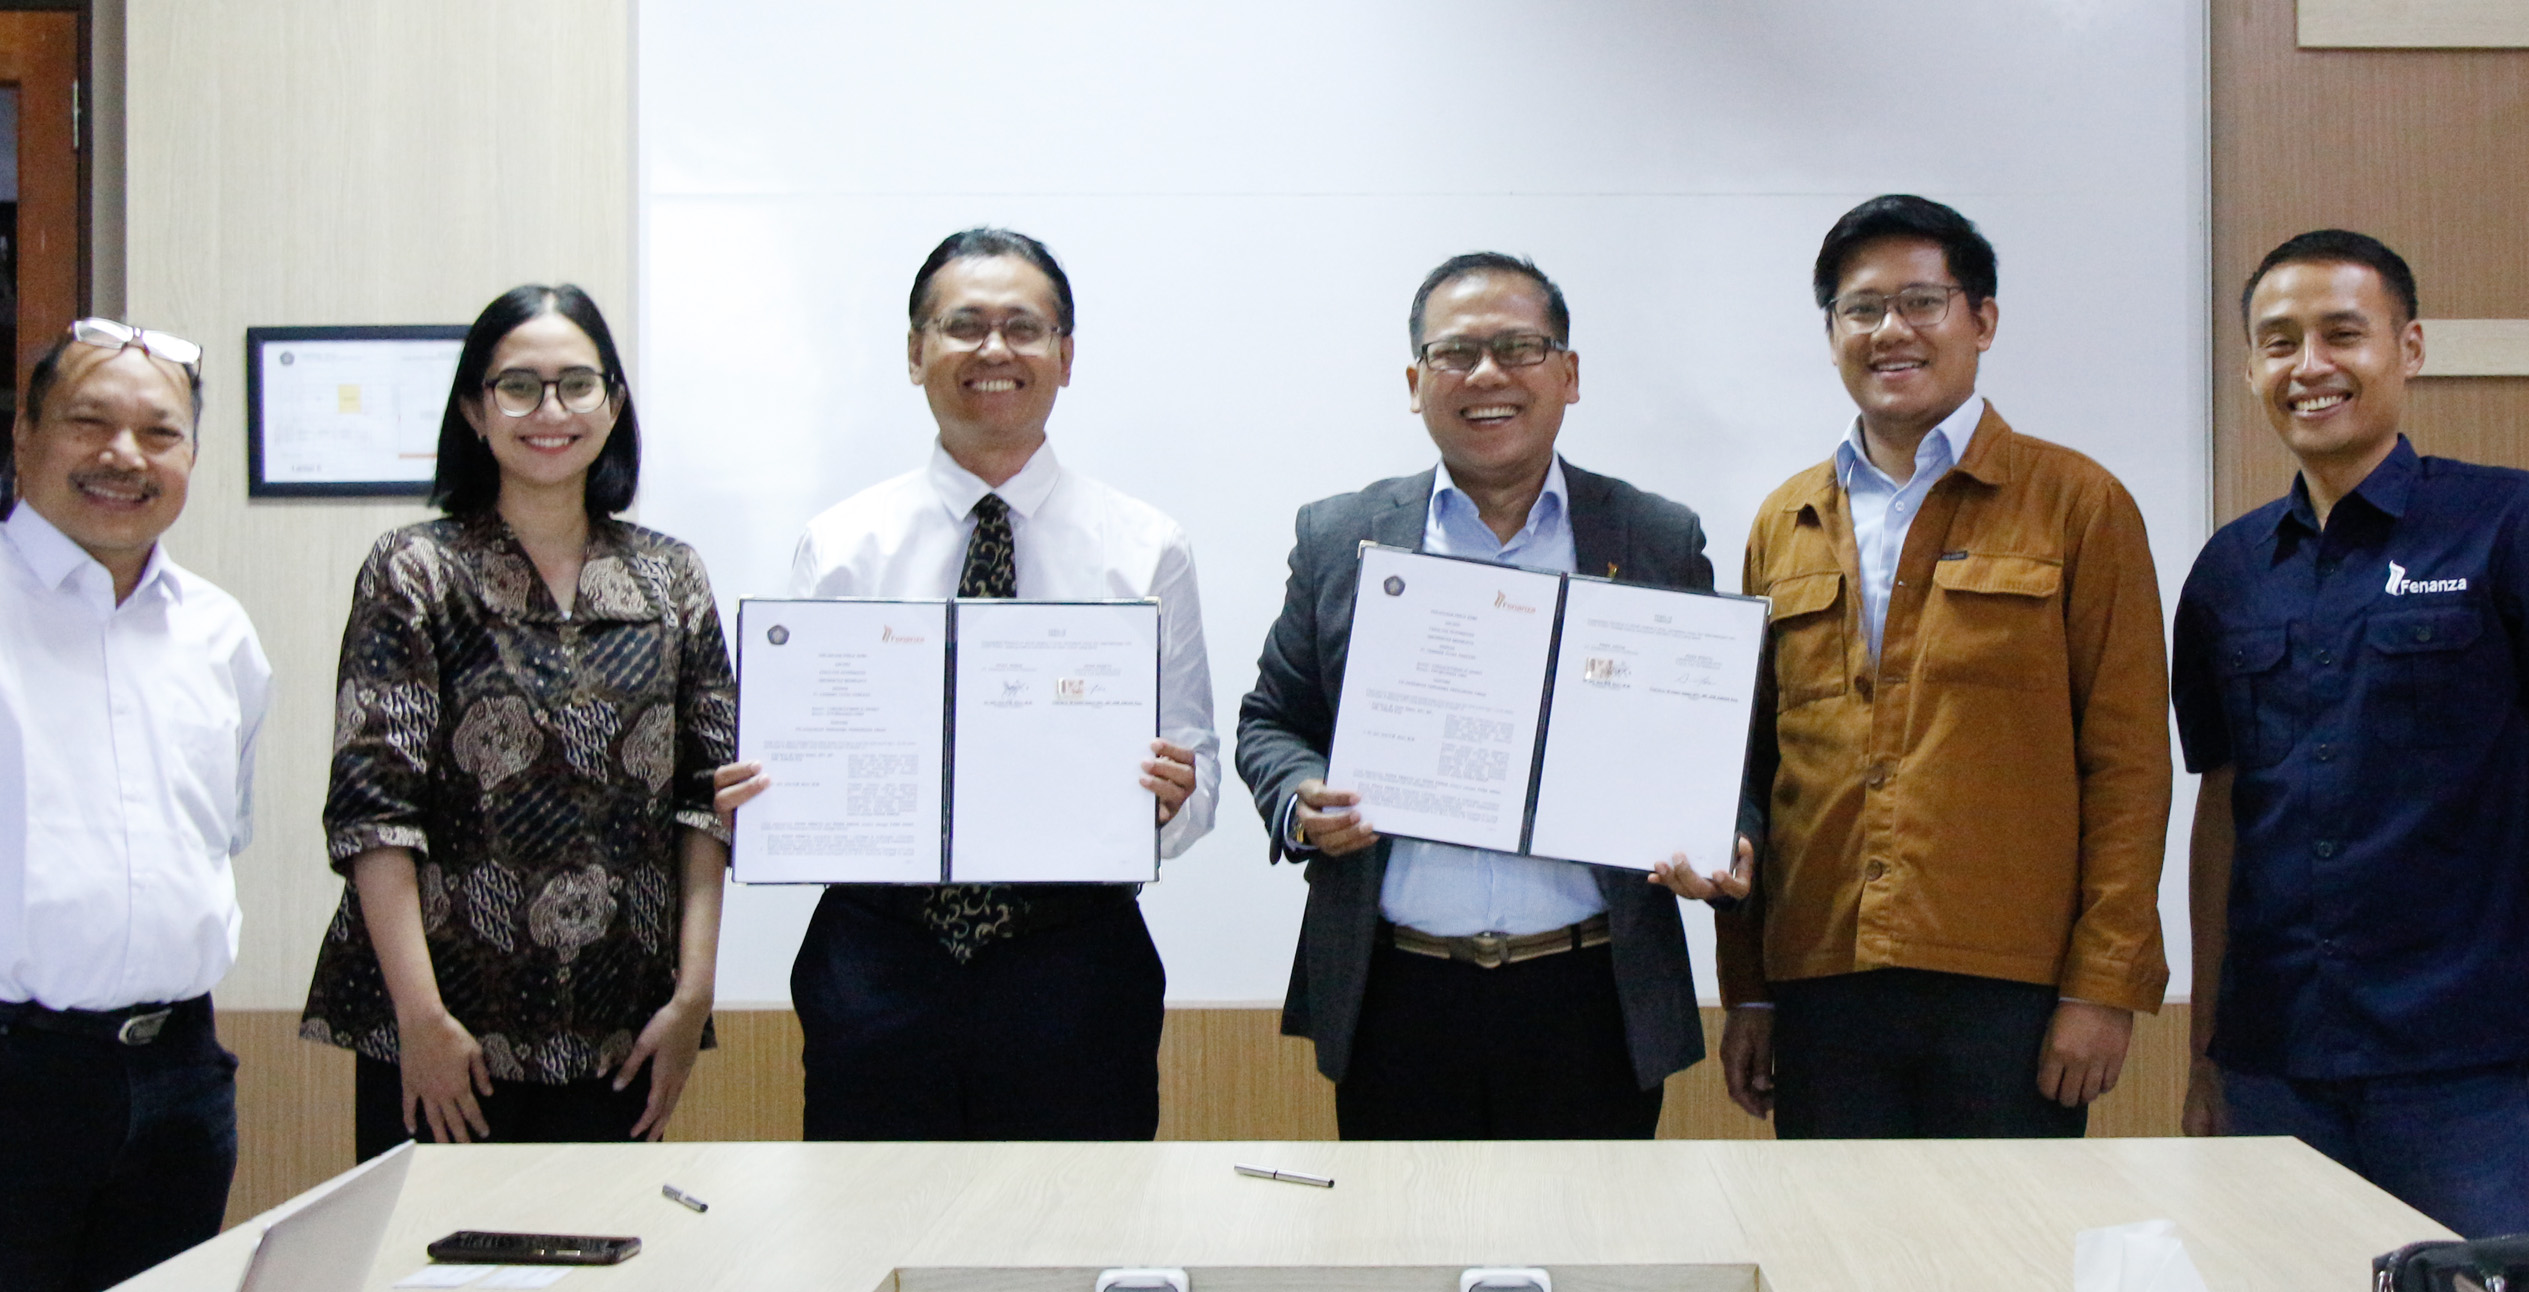 Faculty of Animal Science UB and PT. Fenanza Putra Perkasa Implements Tri Dharma in Higher Education